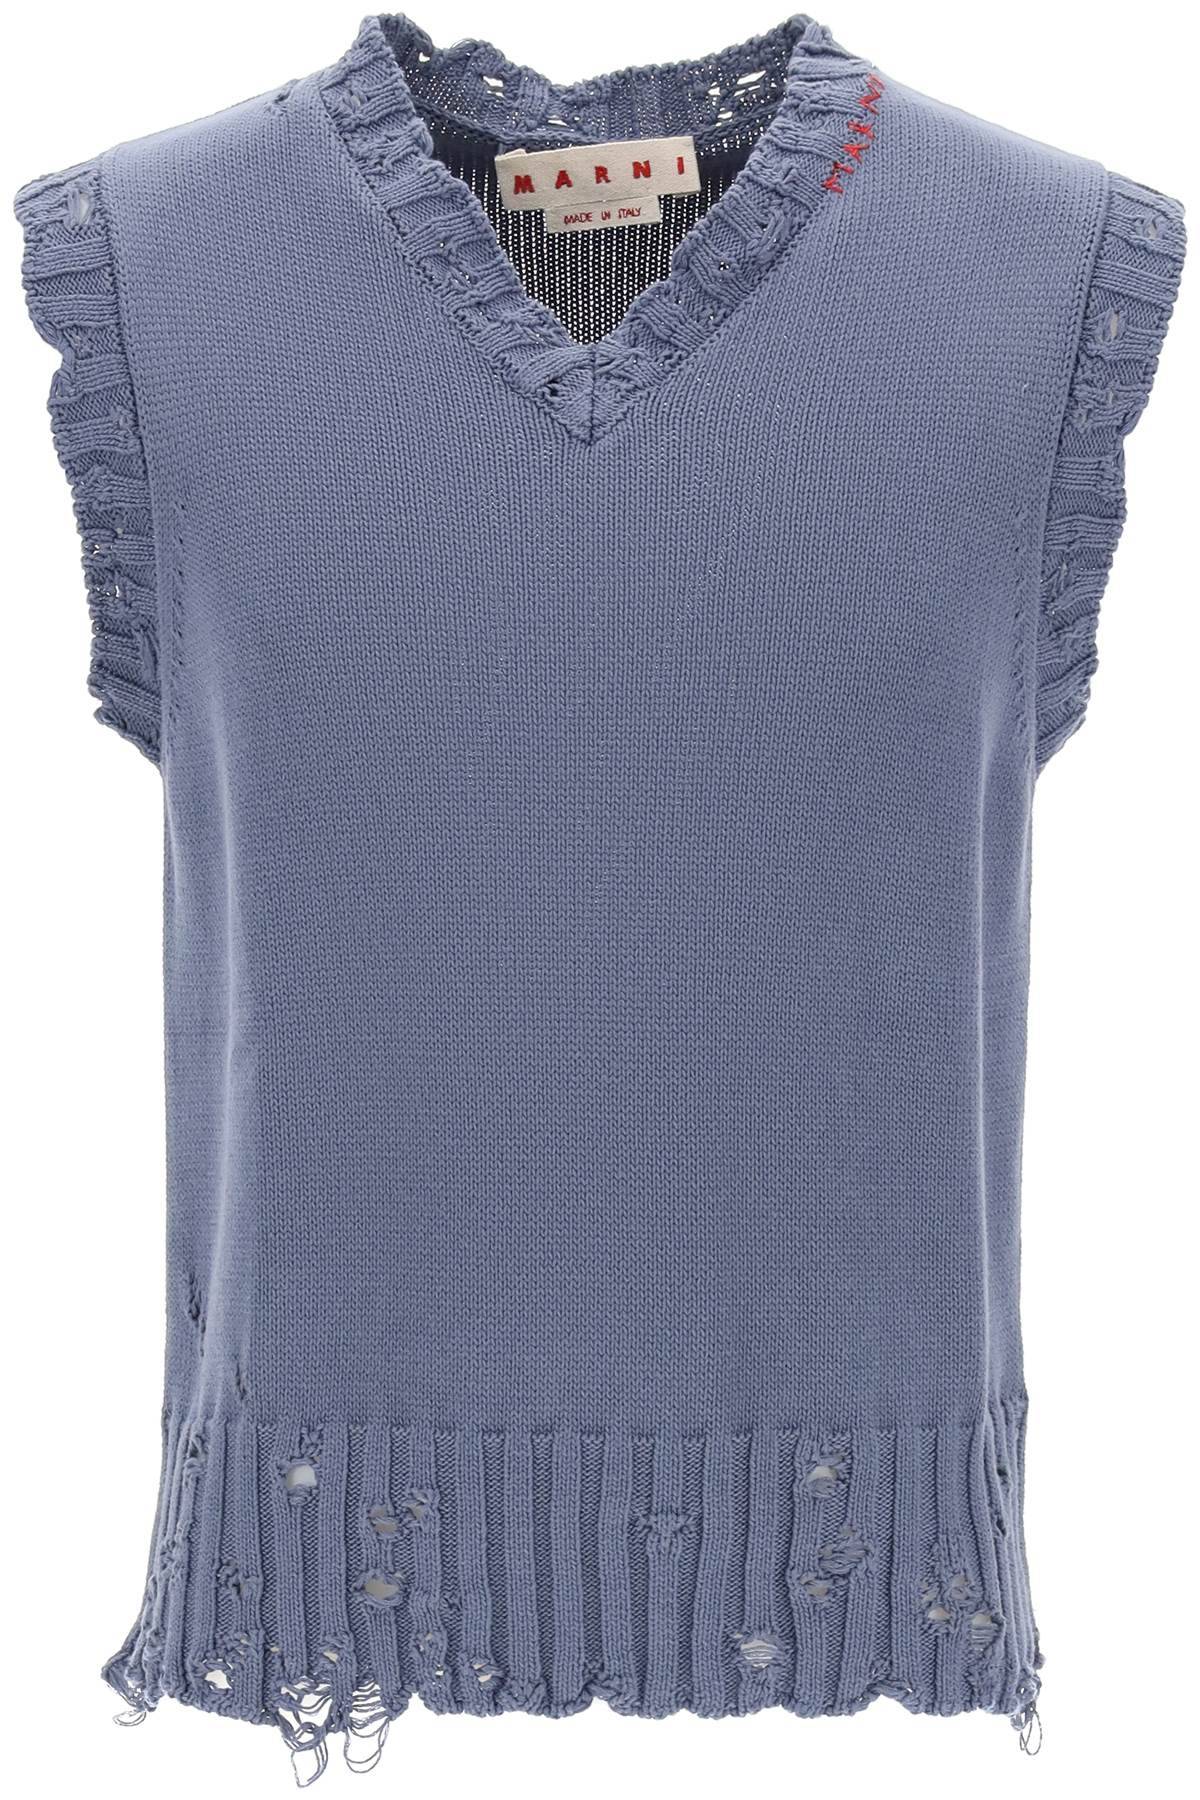 Marni MARNI destroyed-effect vest in cotton